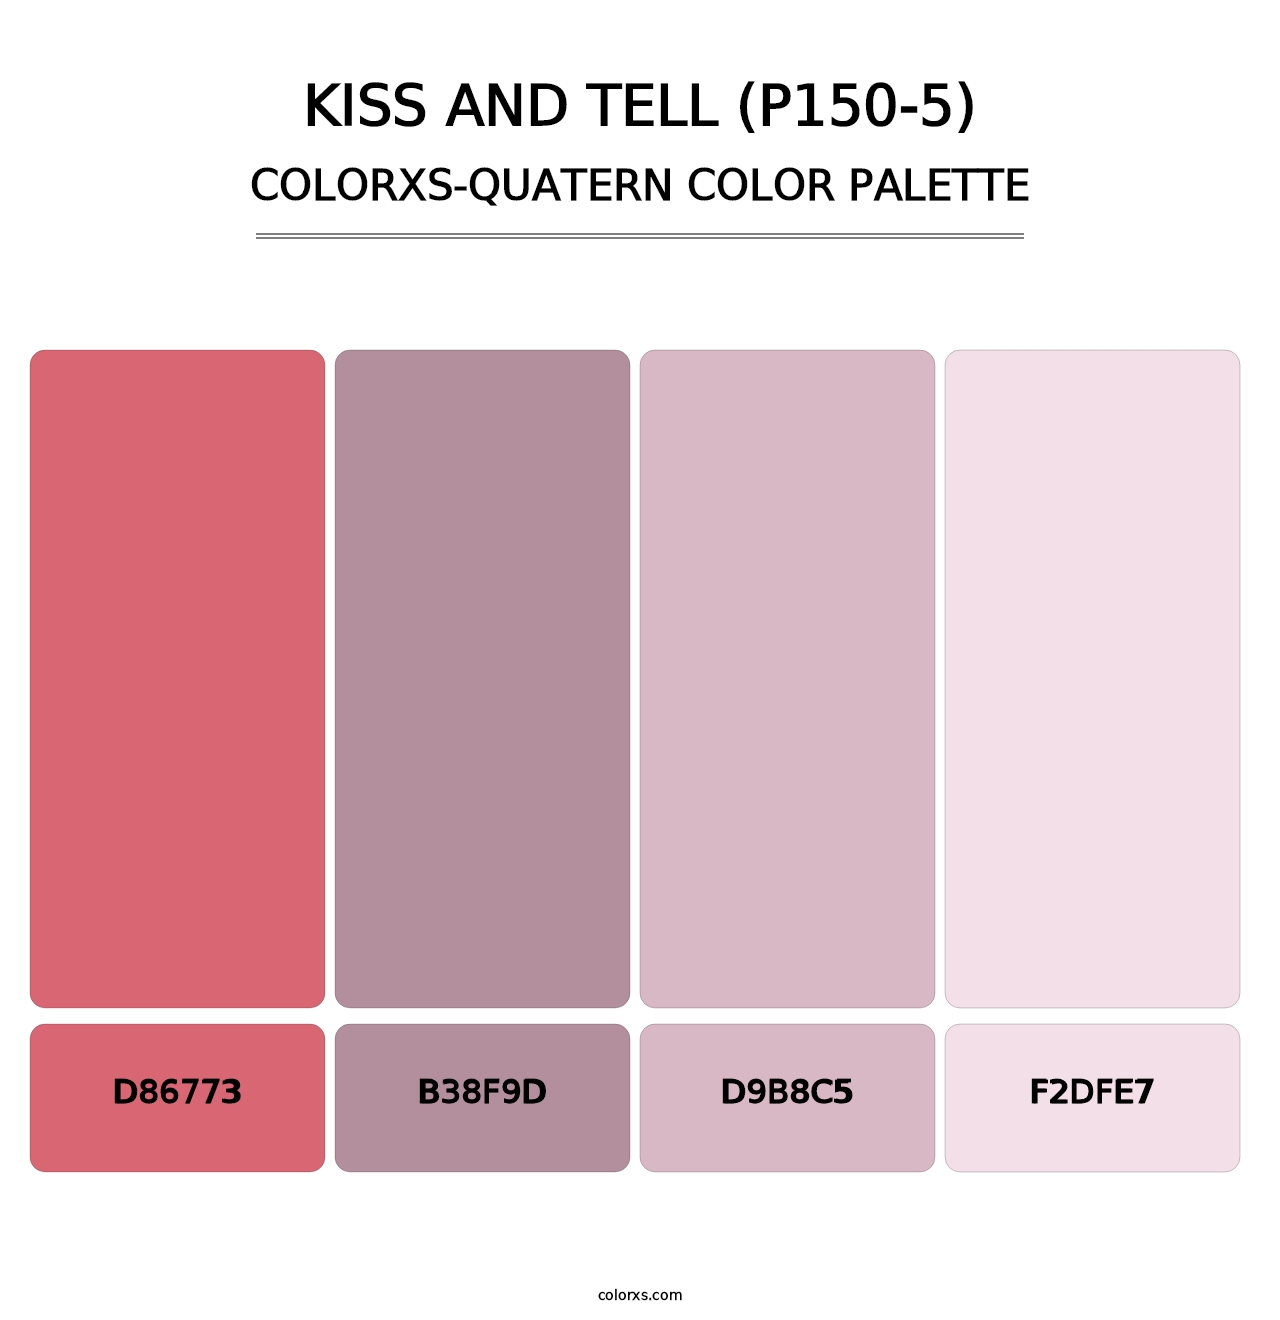 Kiss And Tell (P150-5) - Colorxs Quatern Palette